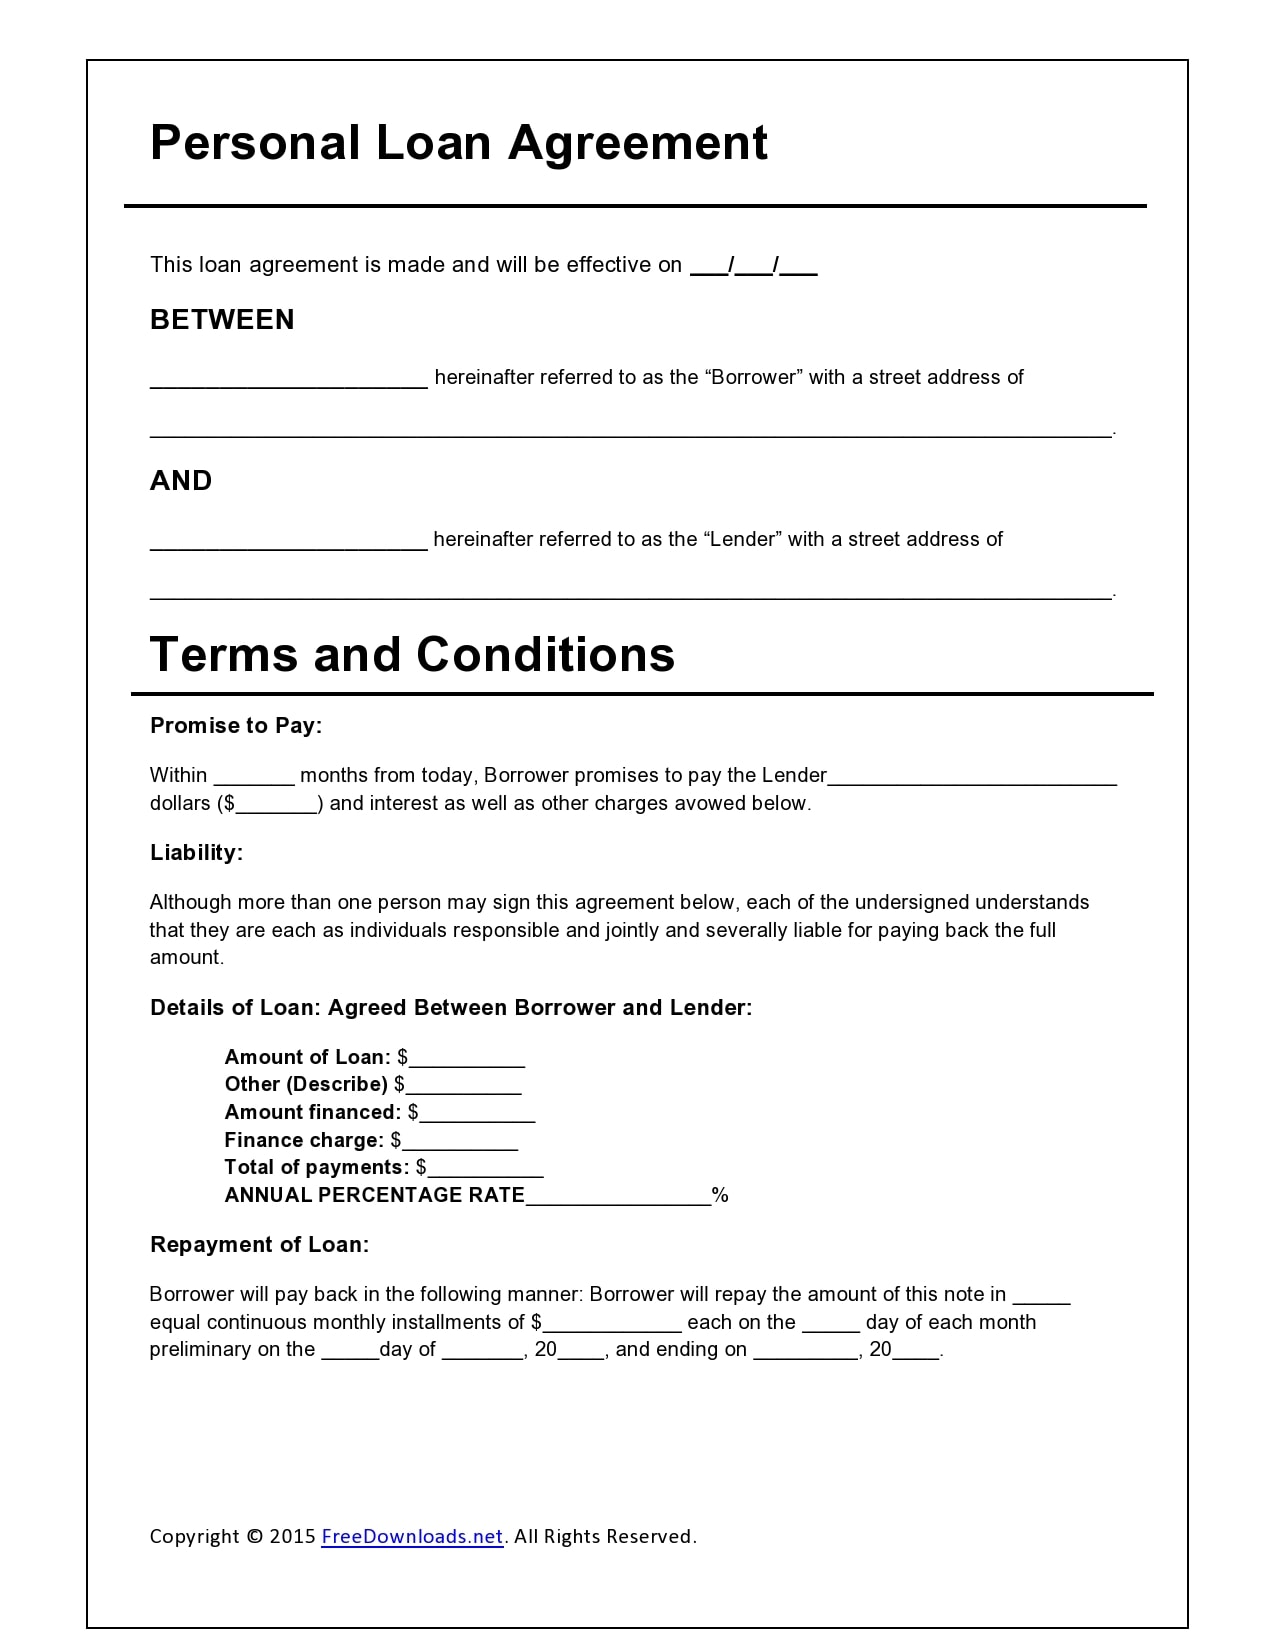 22 Simple Family Loan Agreement Templates (22% Free) Throughout family loan agreement template free